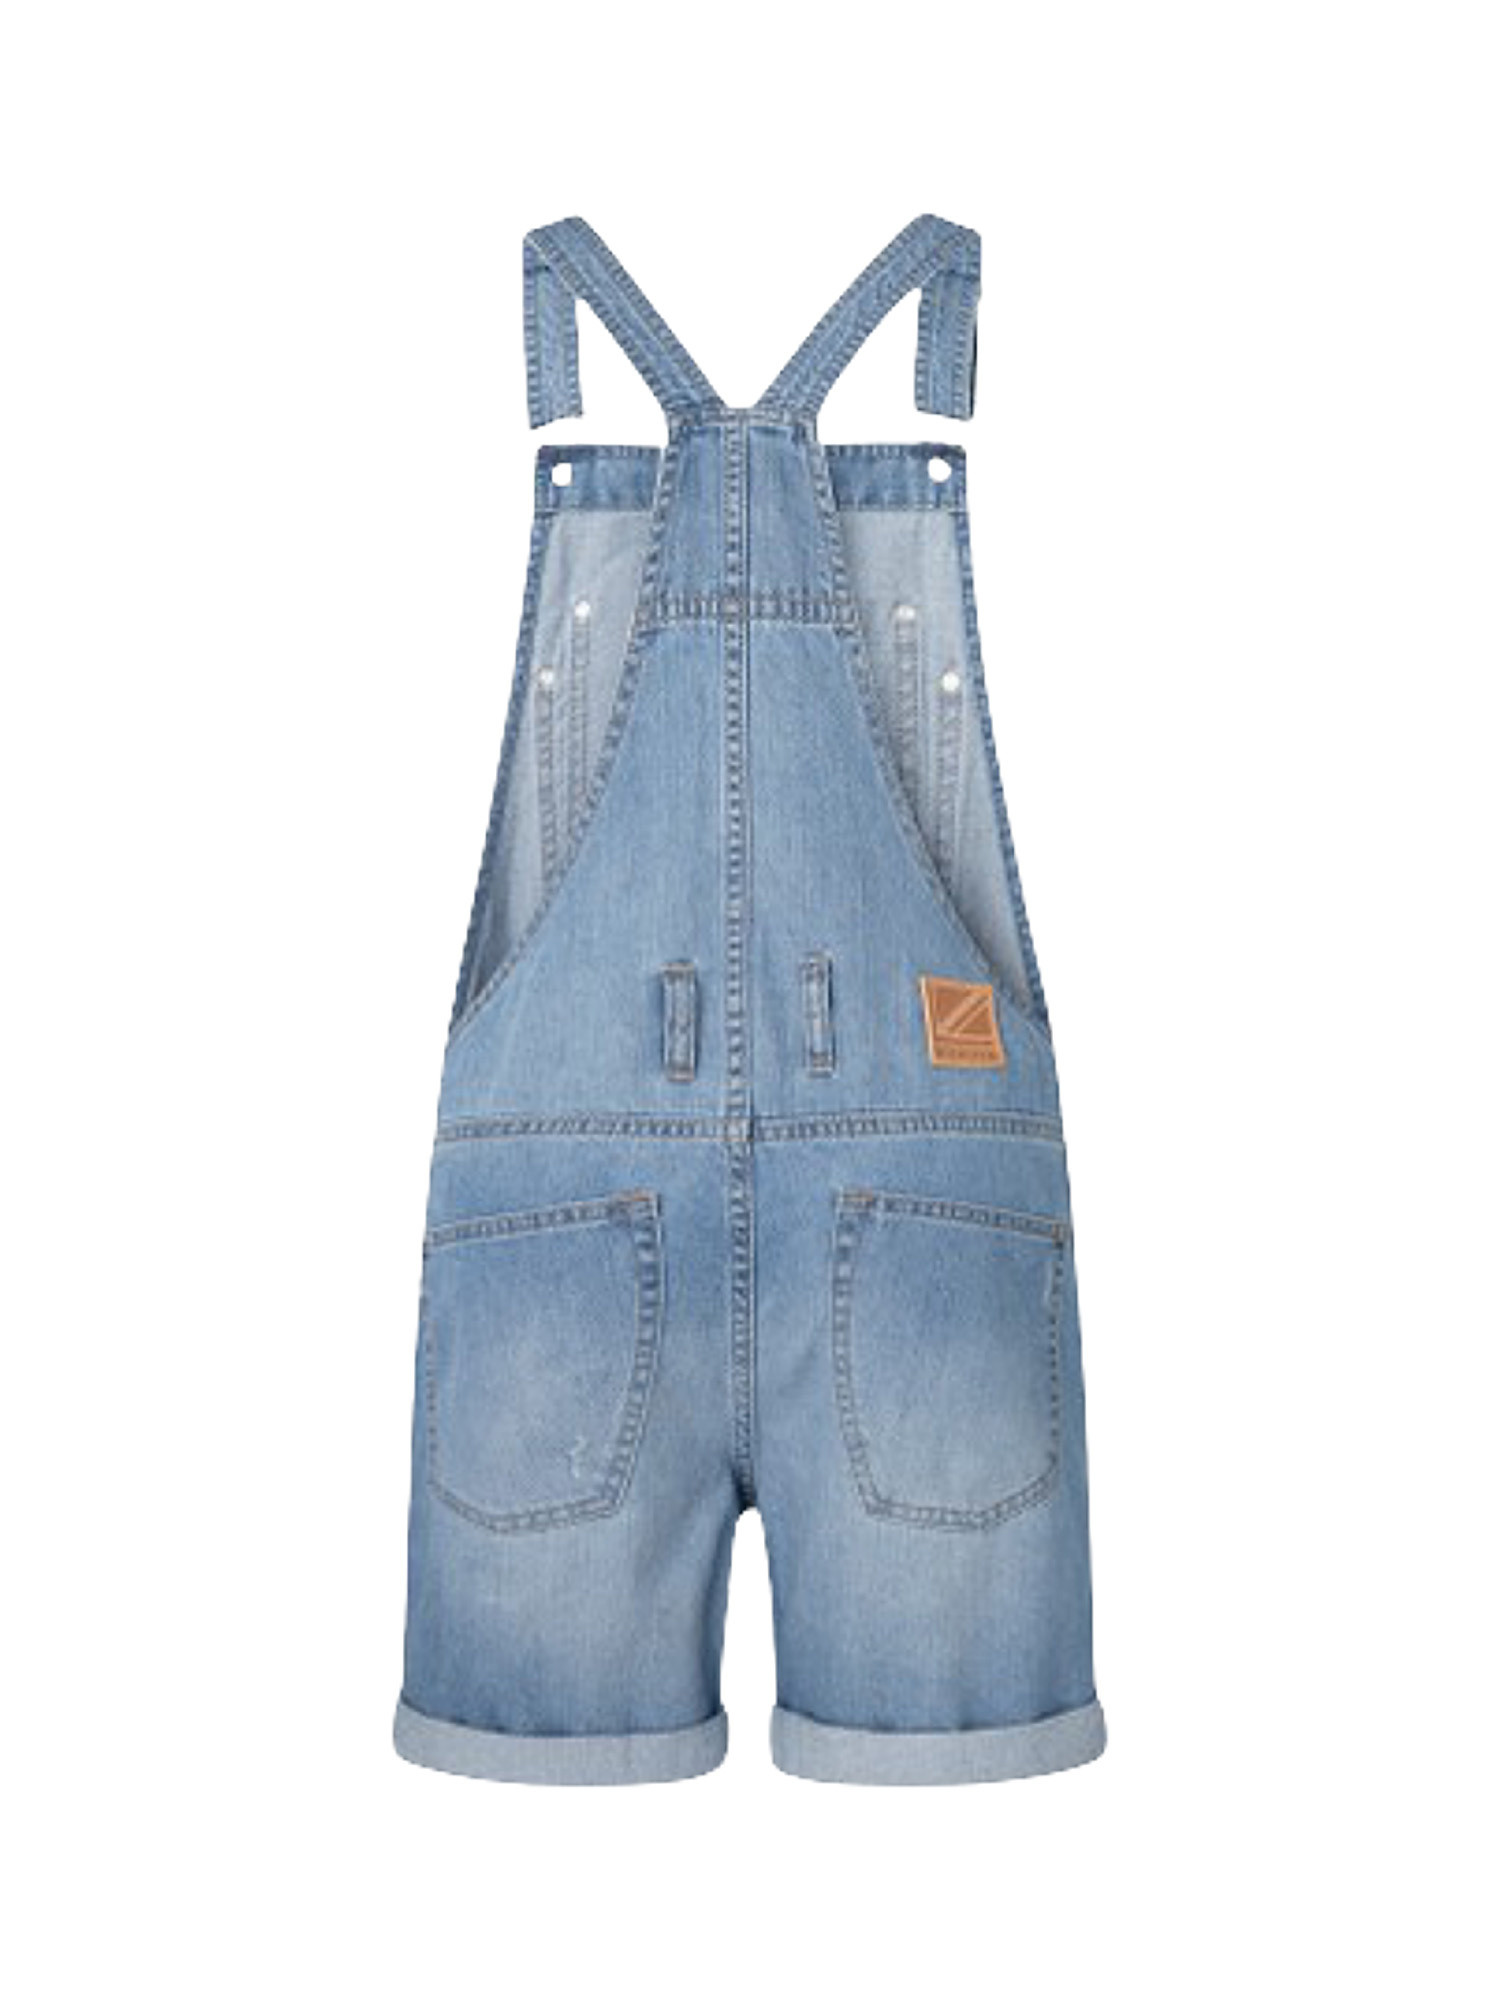 Salopette corta abby fabby, Denim, large image number 1